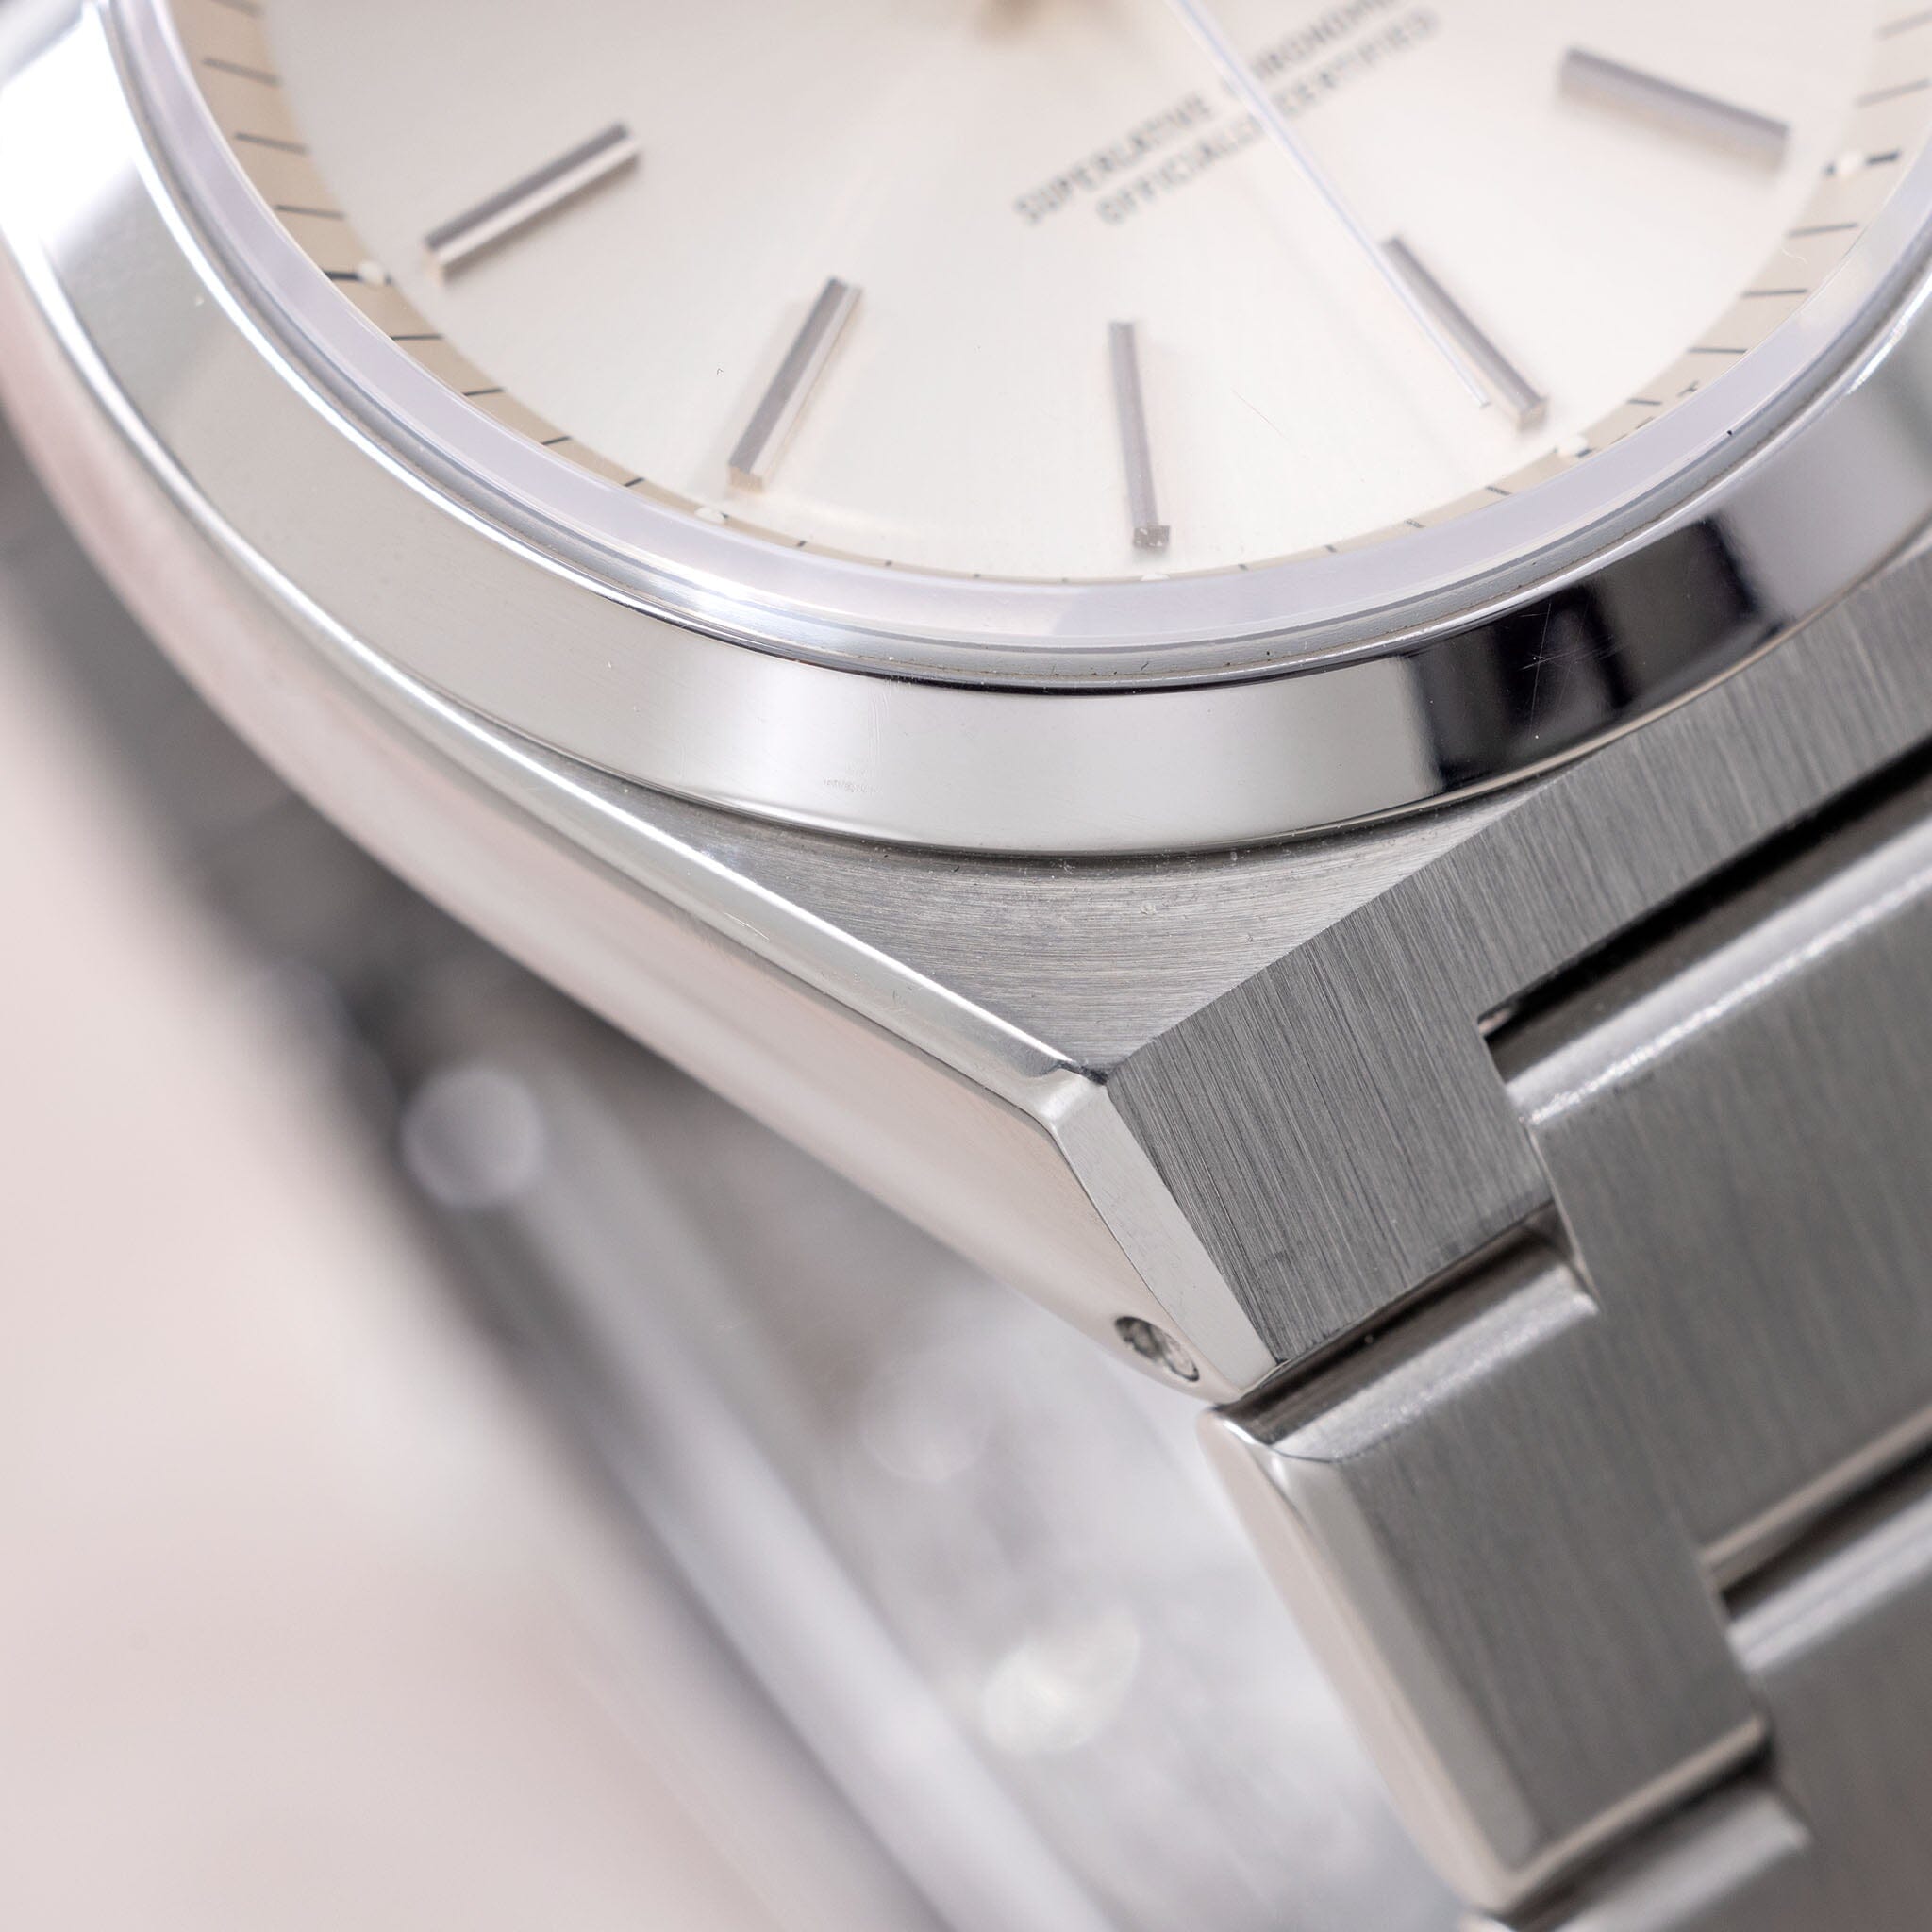 Rolex Oyster Perpetual Date Silver Dial Ref 1530